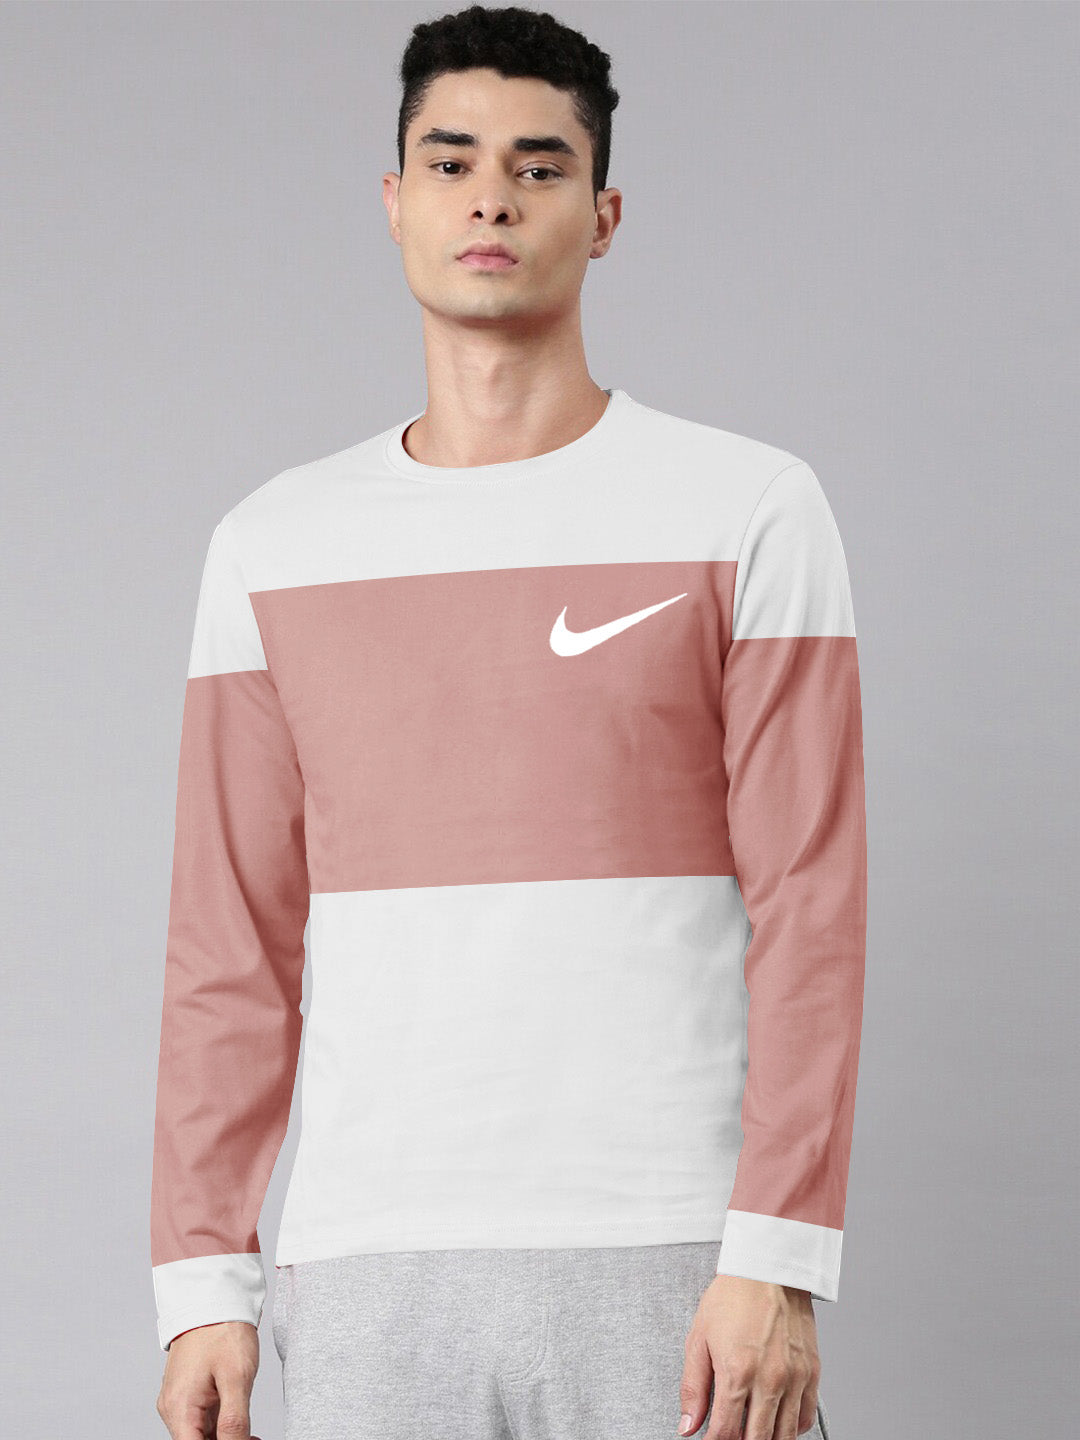 NK Crew Neck Tee Shirt For Men-White with Tea Pink Panel-SP2257